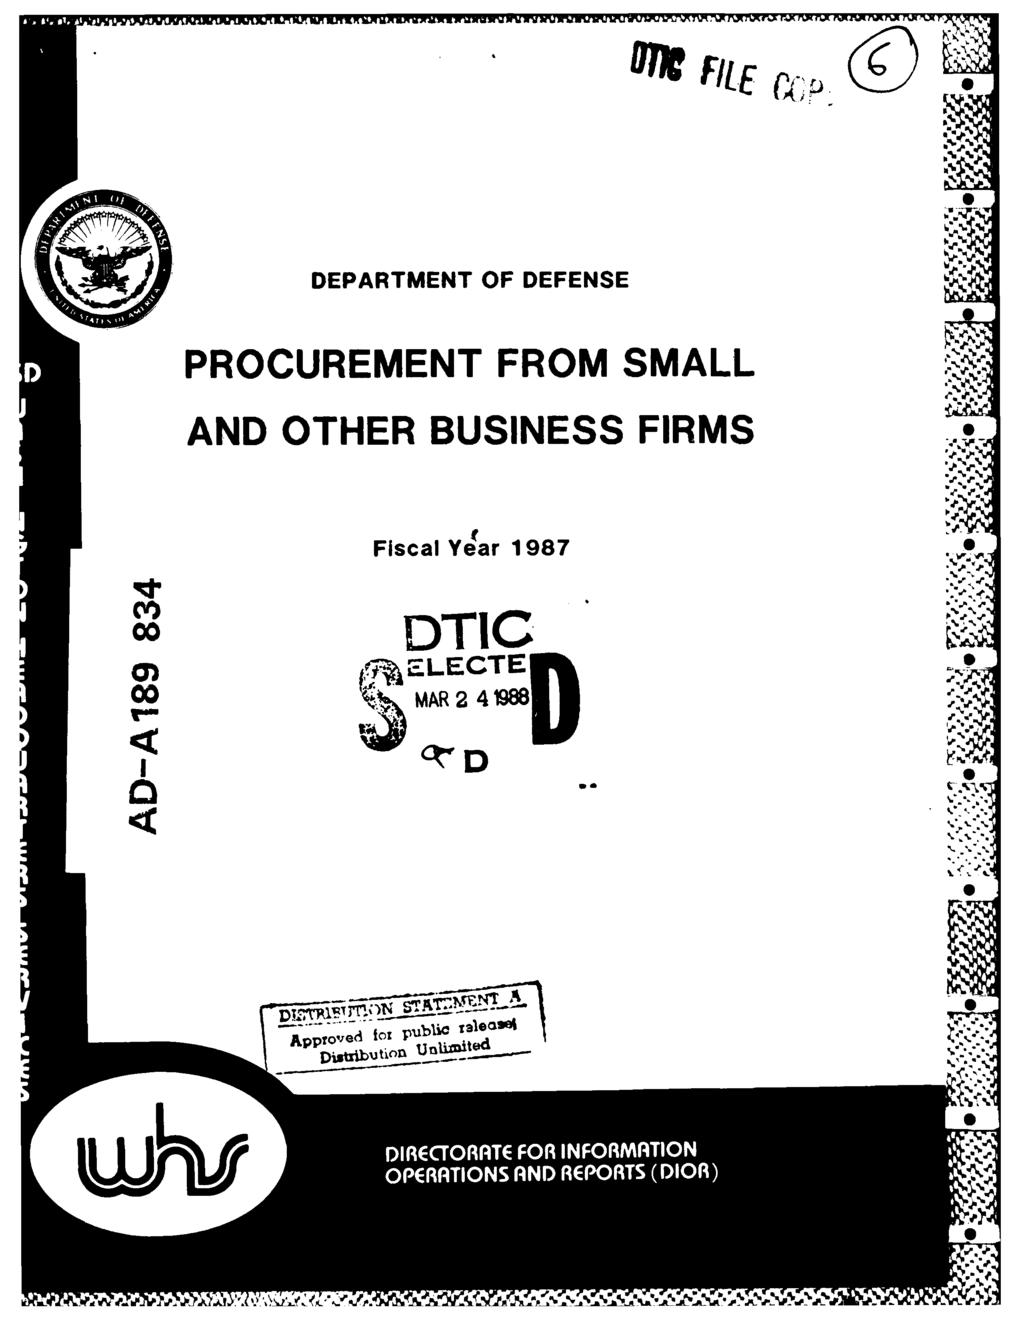 DEPARTMENT OF DEFENSE PROCUREMENT FROM SMALL AND OTHER BUSINESS FIRMS0 Flscal Year